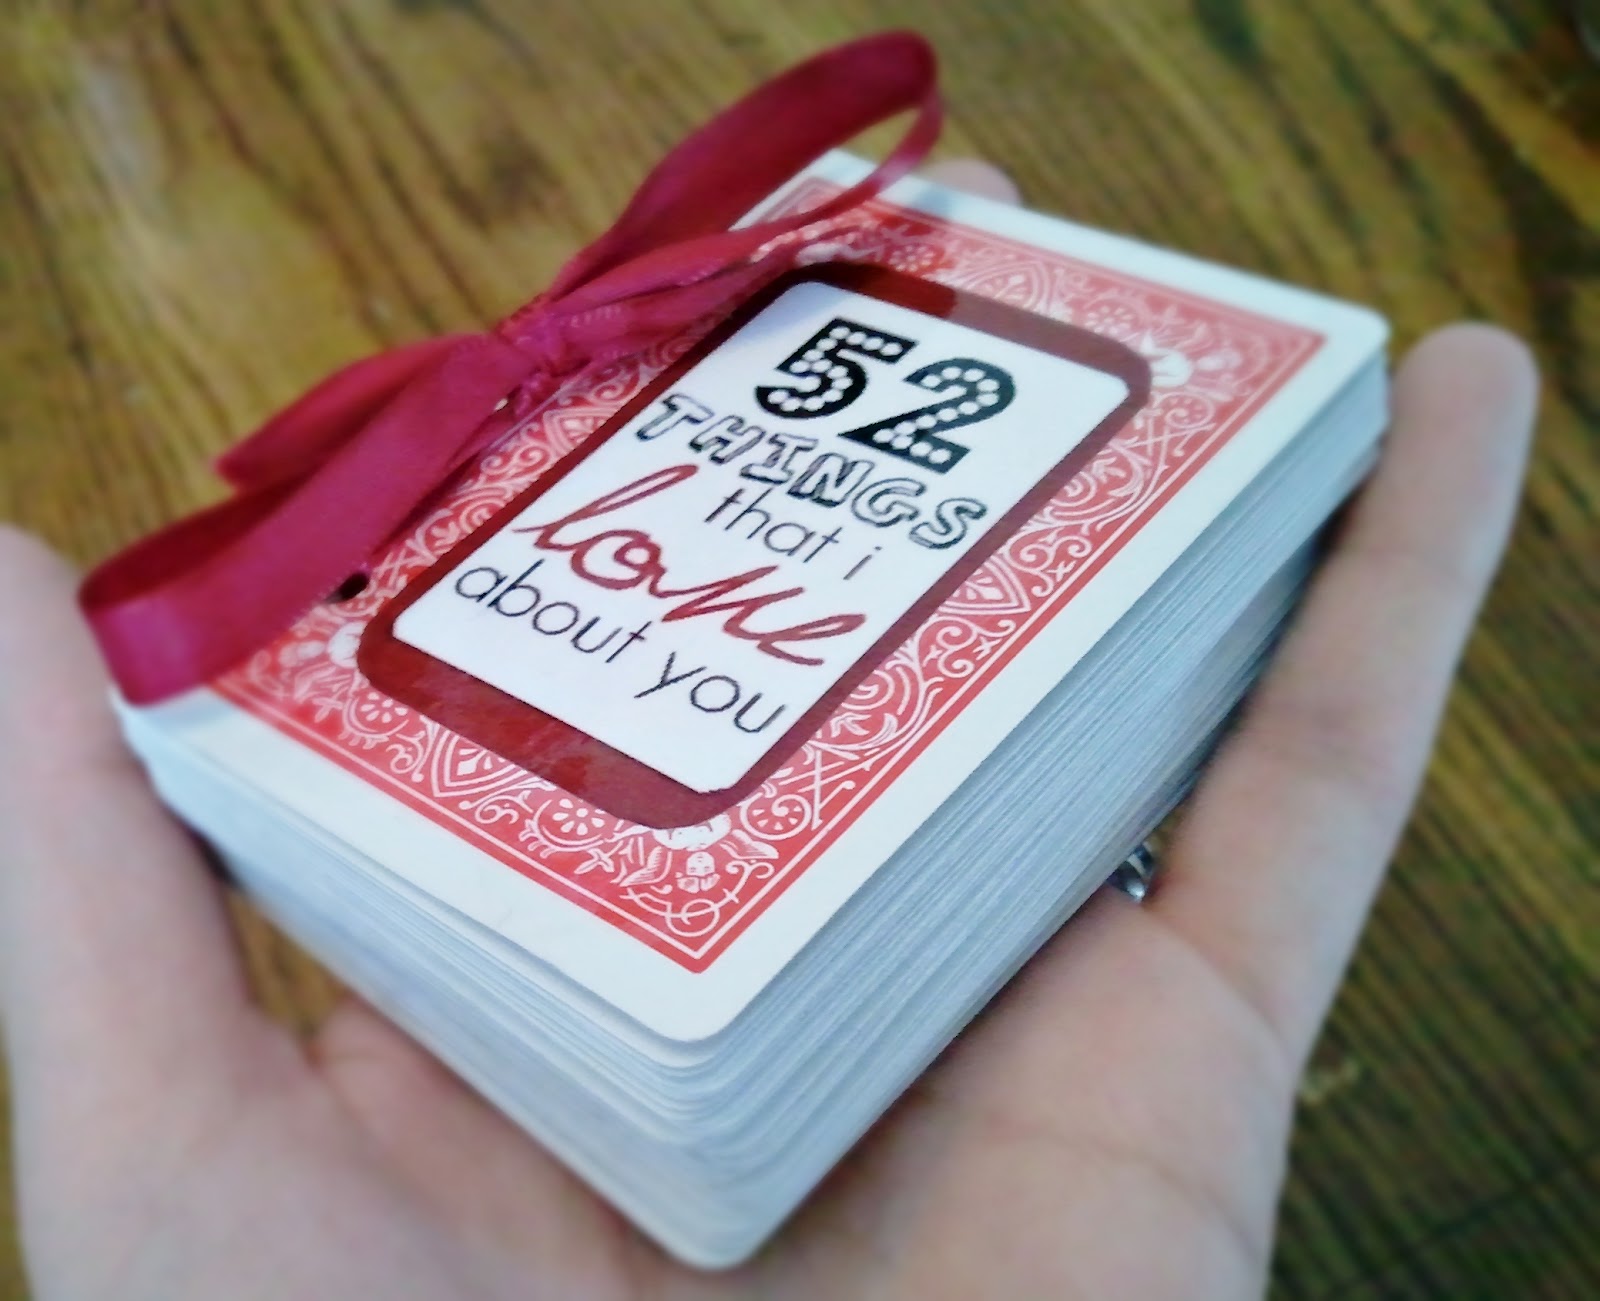 On A Cold Day: 23 Things I Love About You Regarding 52 Things I Love About You Deck Of Cards Template